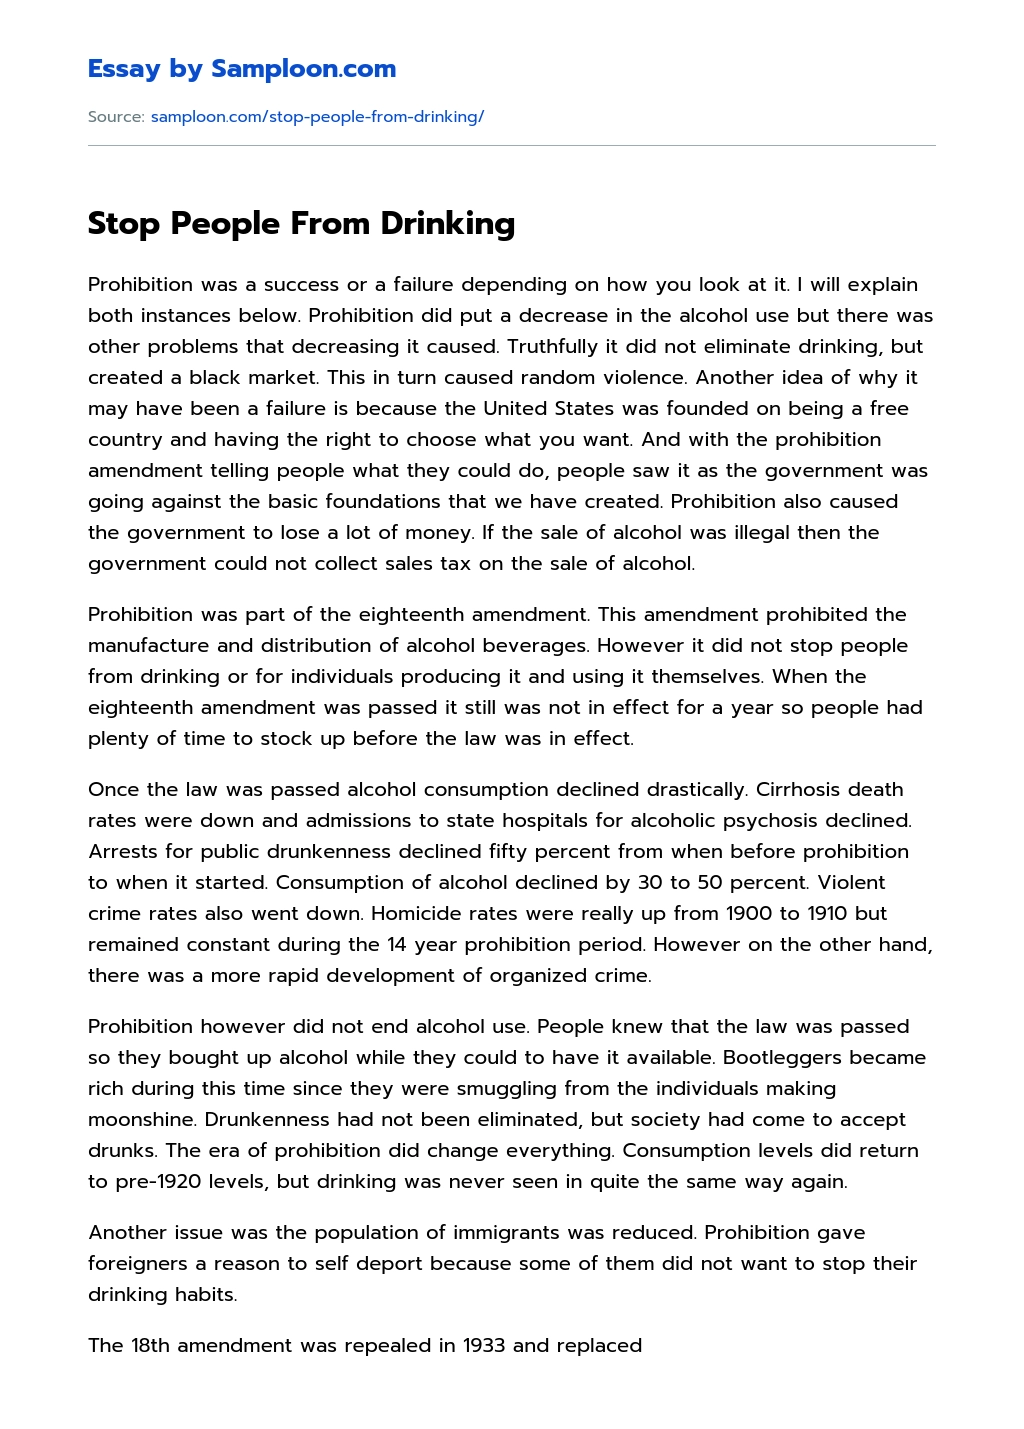 Stop People From Drinking essay